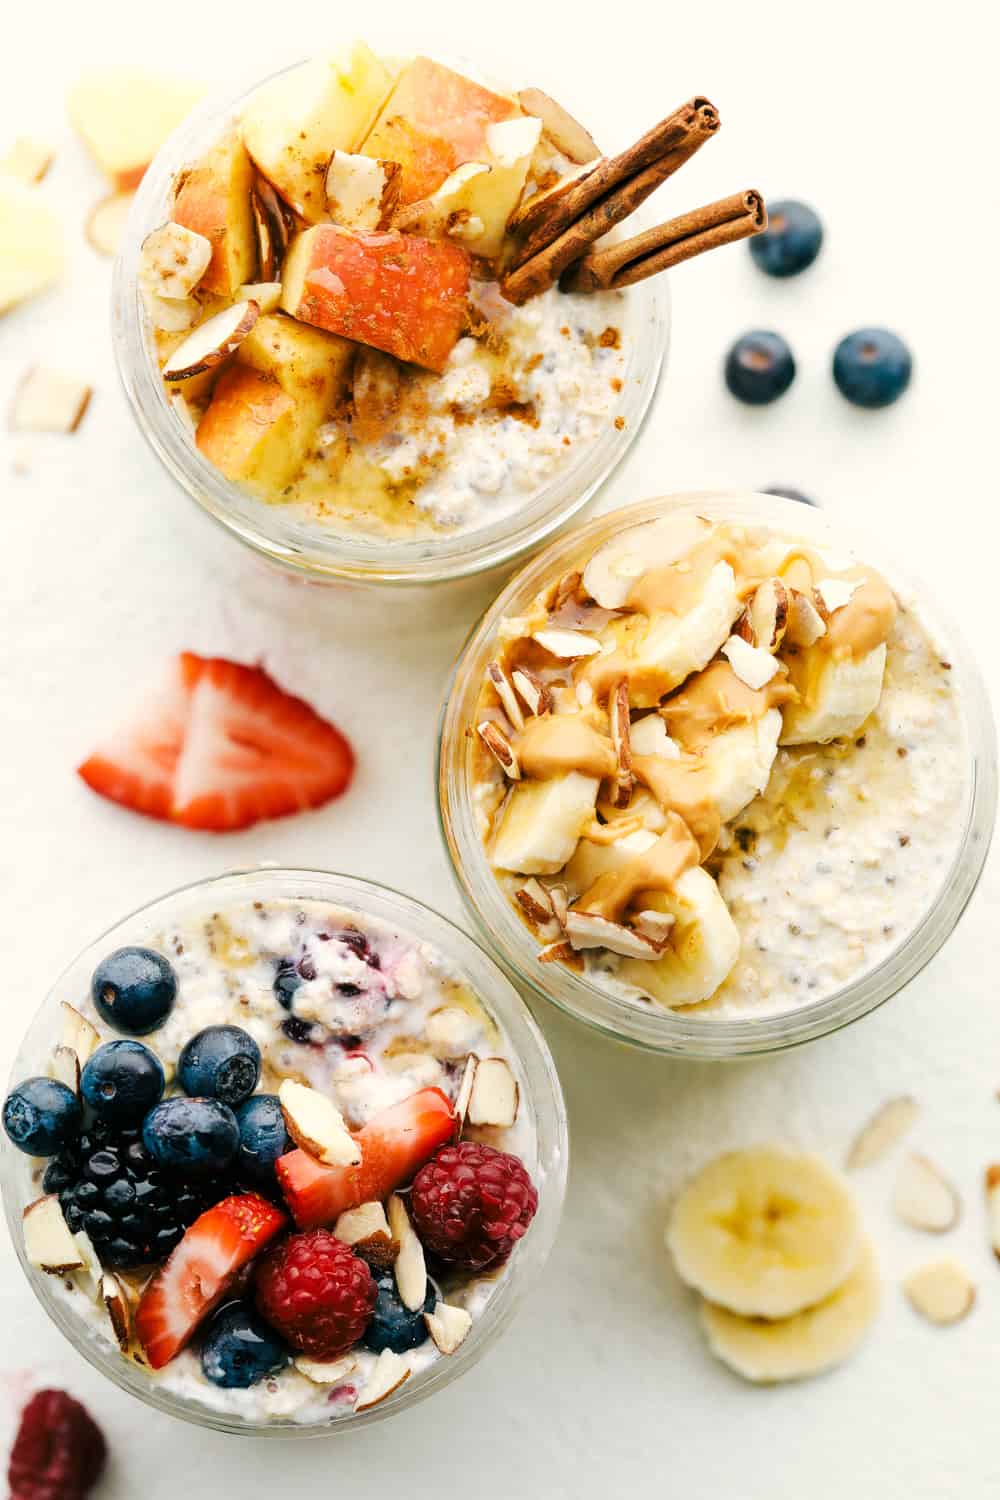 Overnight oats with different toppings and flavor combinations.